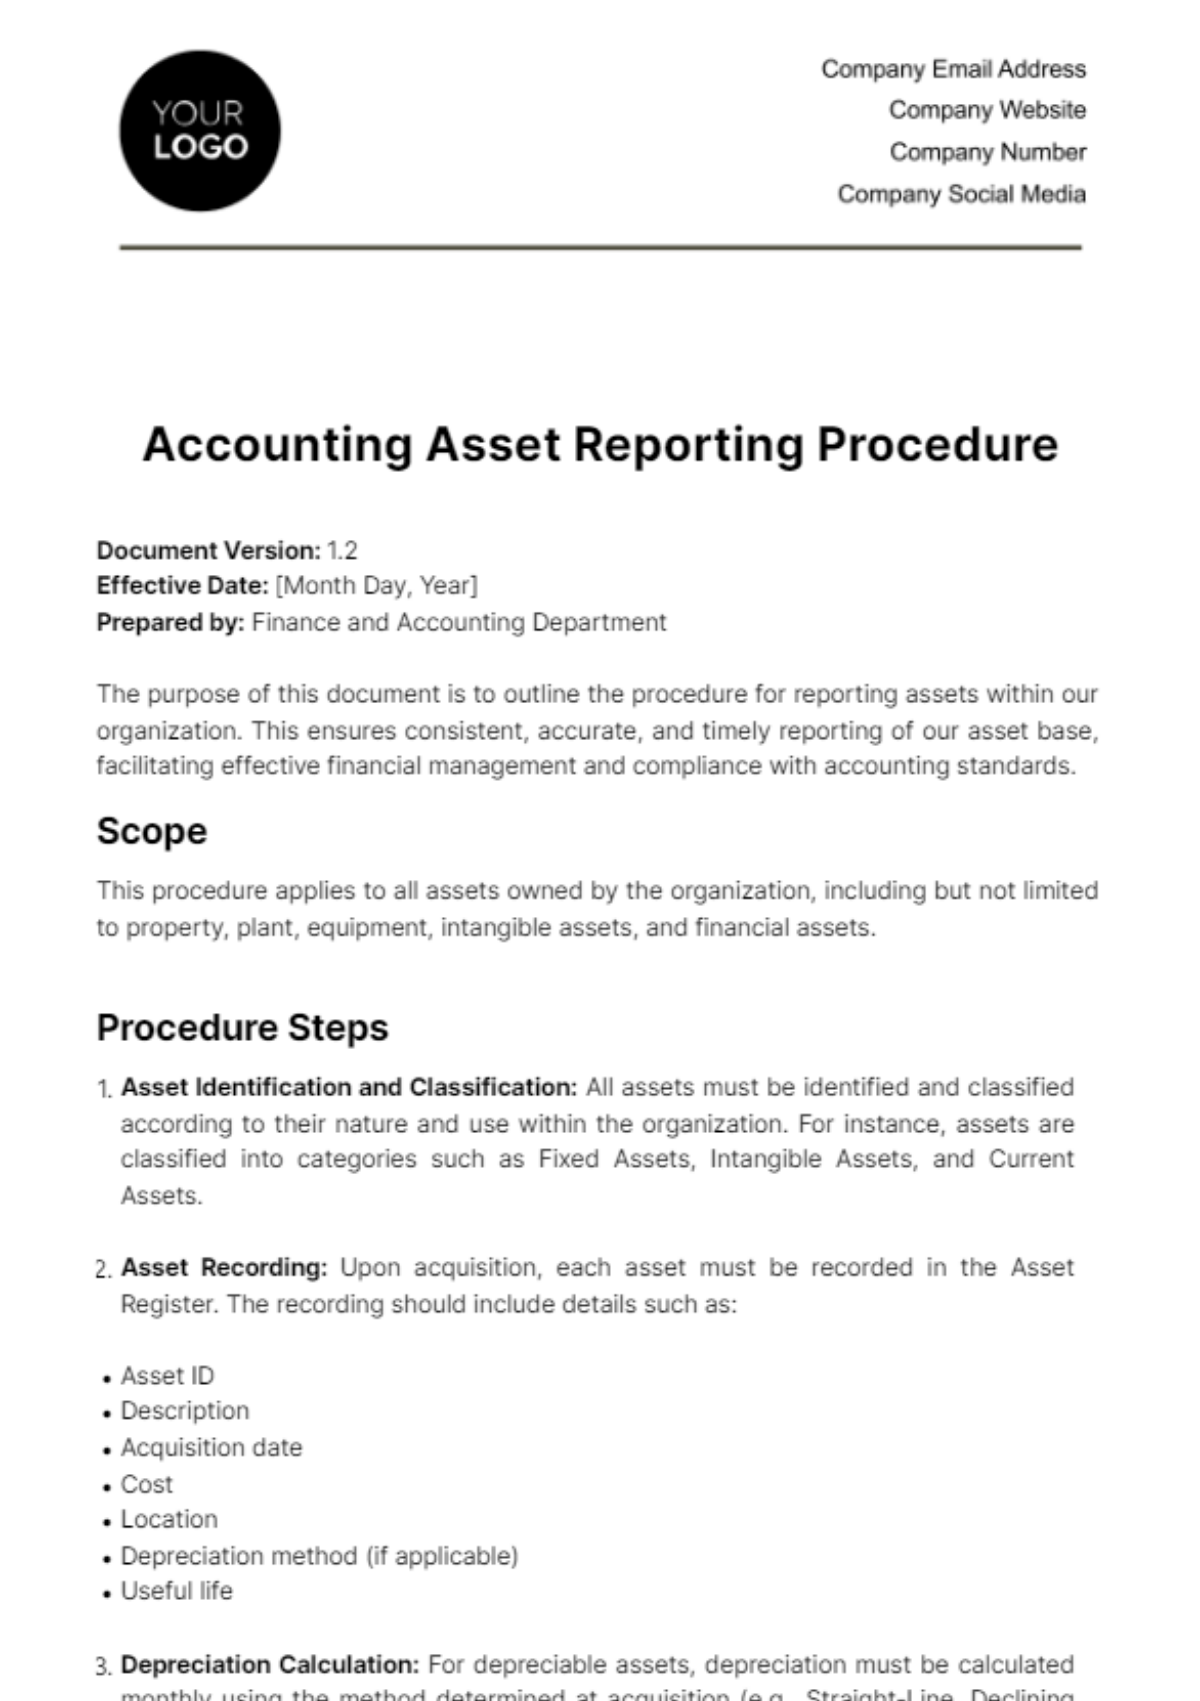 Free Accounting Asset Reporting Procedure Template